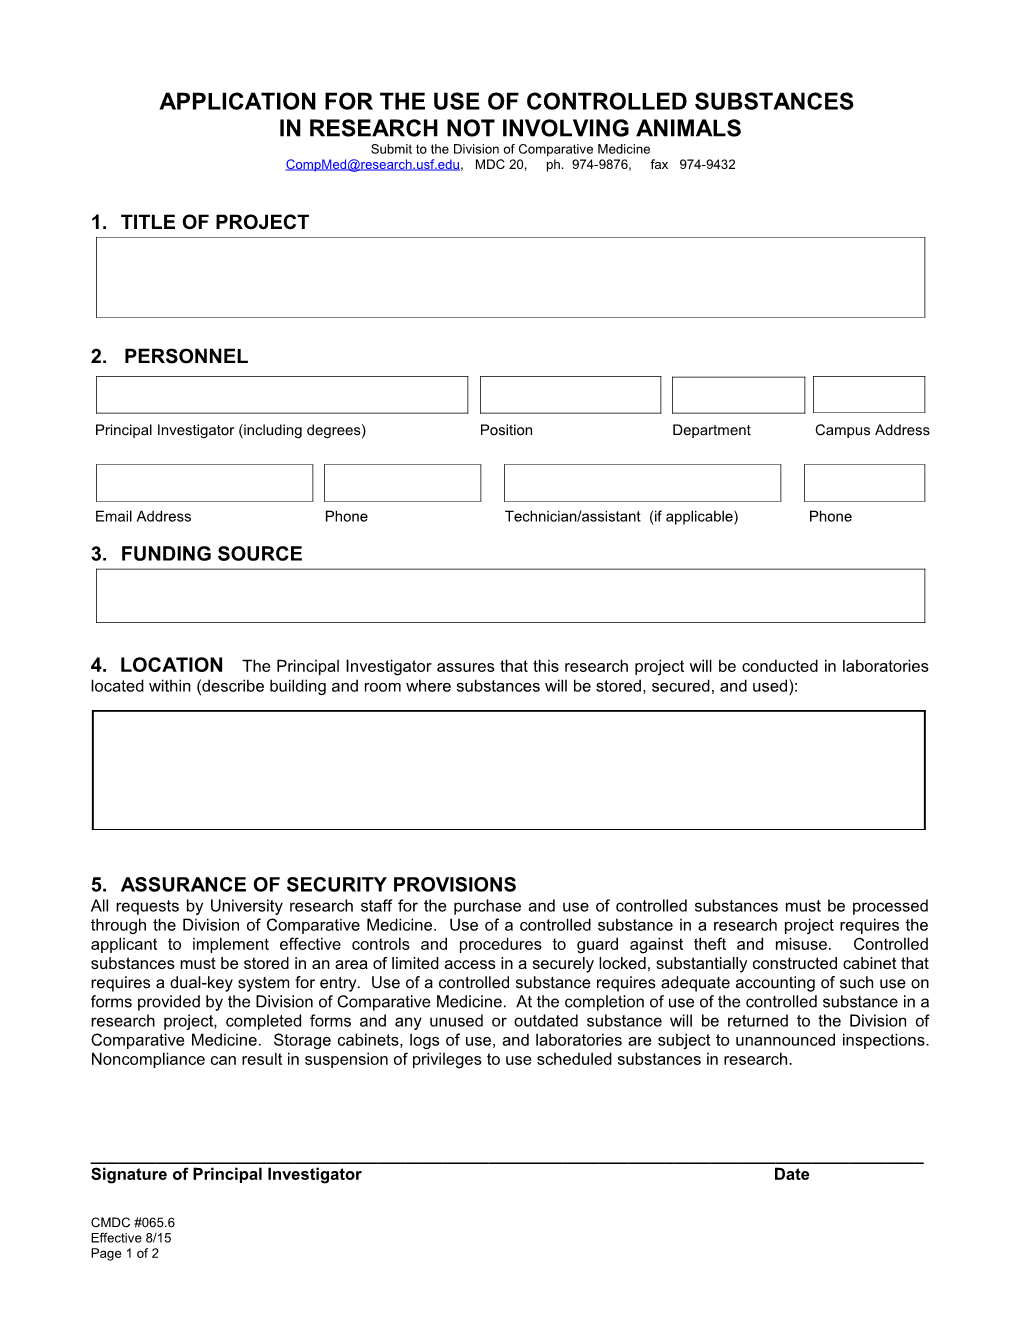 Application for the Use of Animals in Research